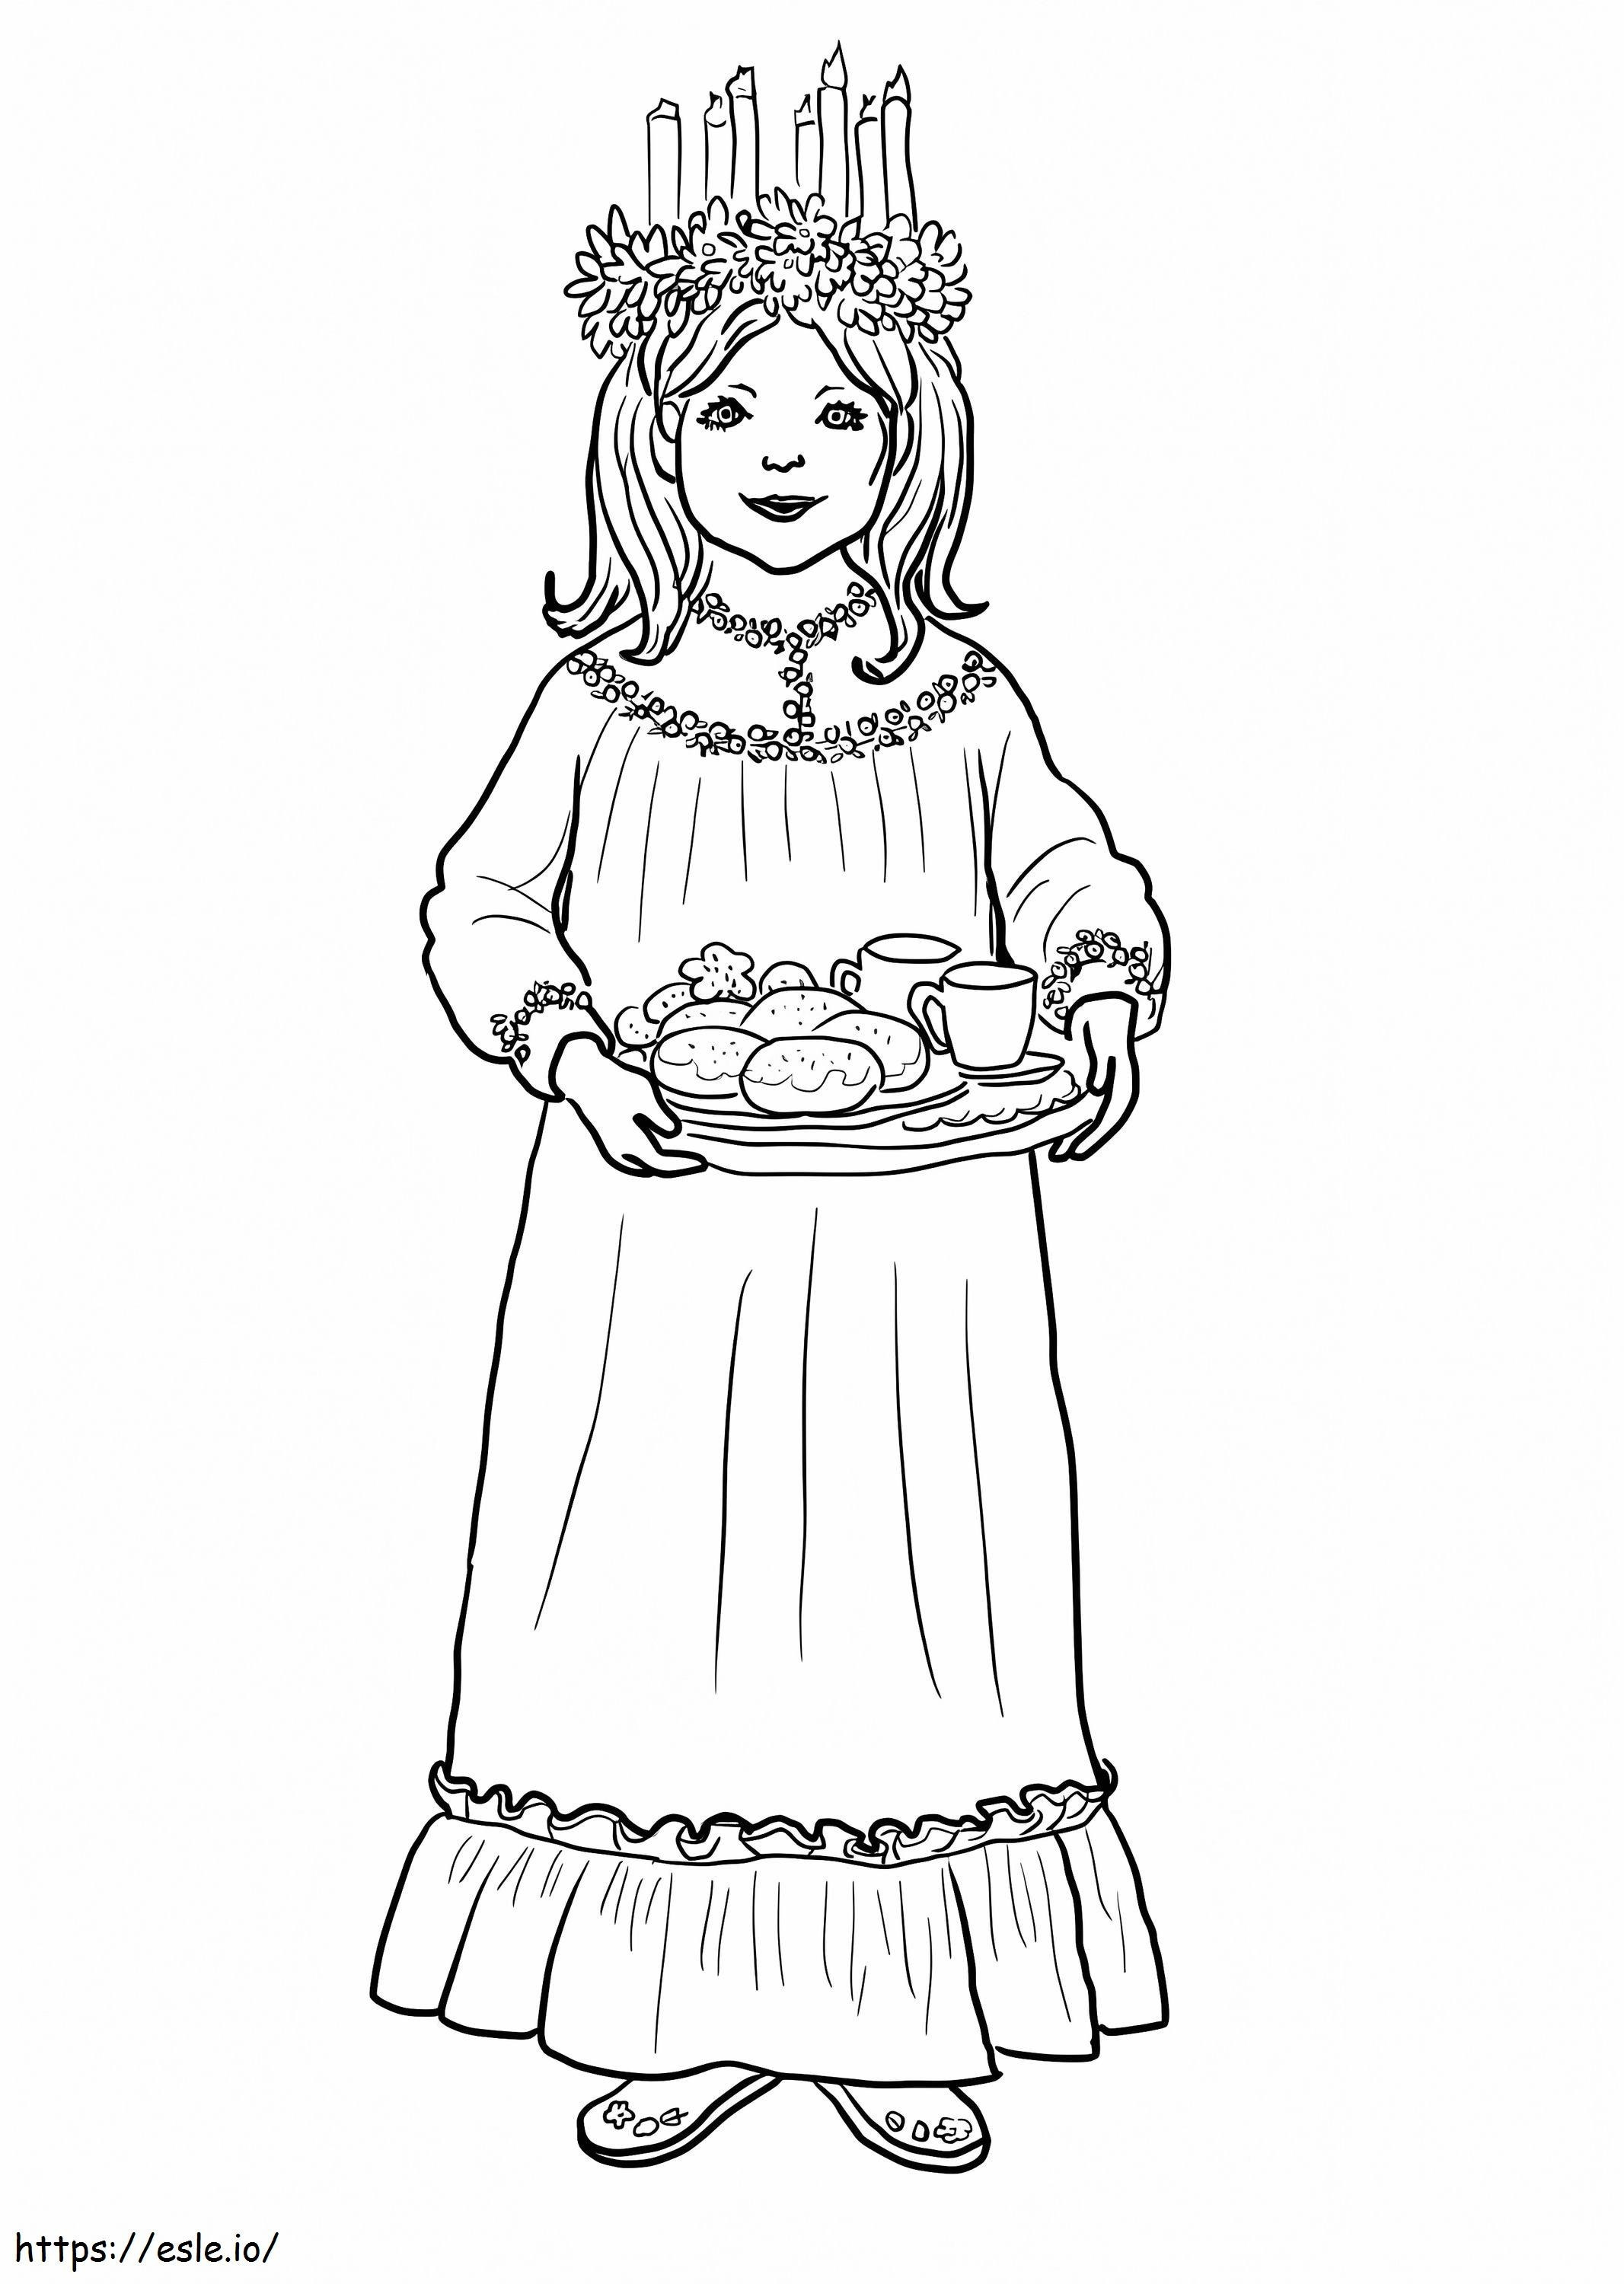 Saint Lucy Day coloring page